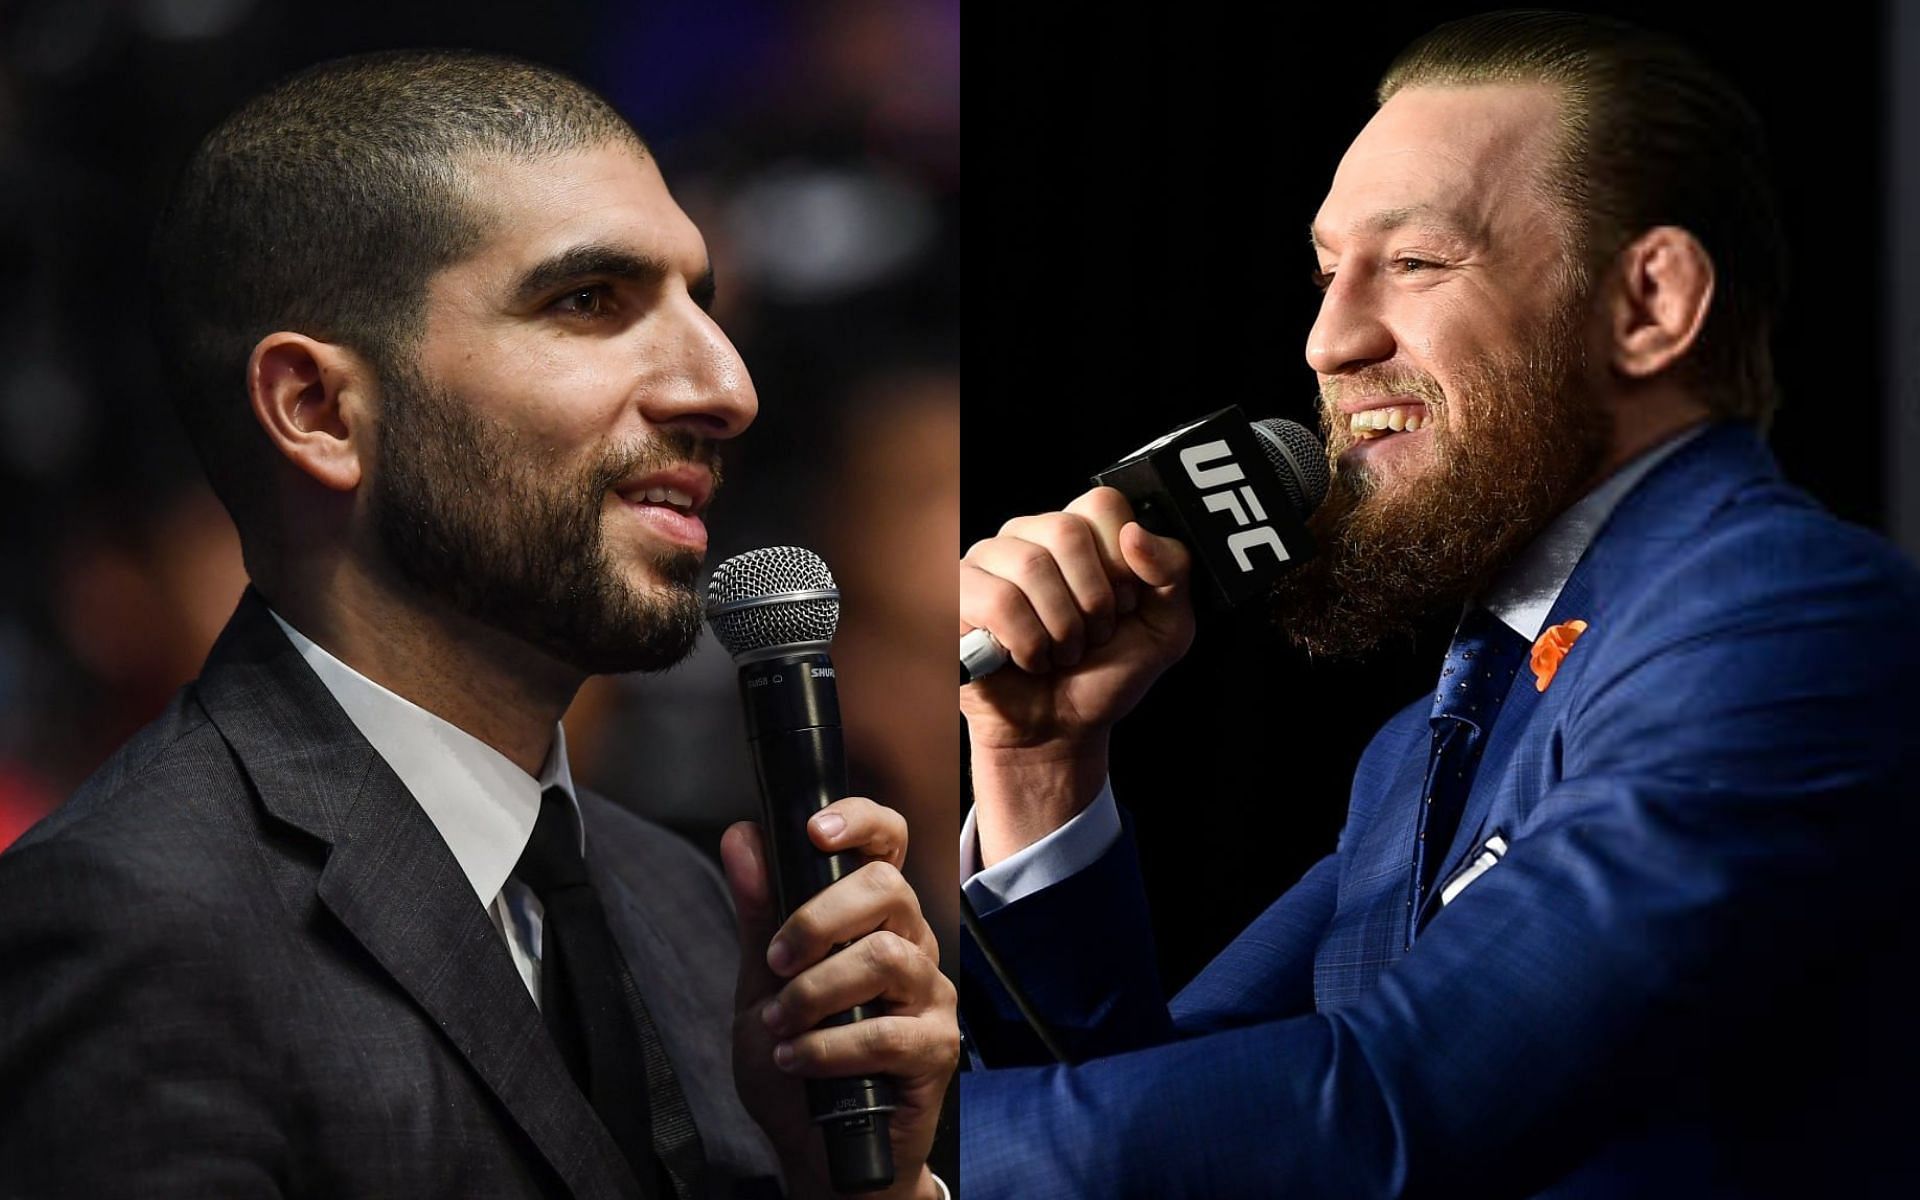 Ariel Helwani (left) and Conor McGregor (right)